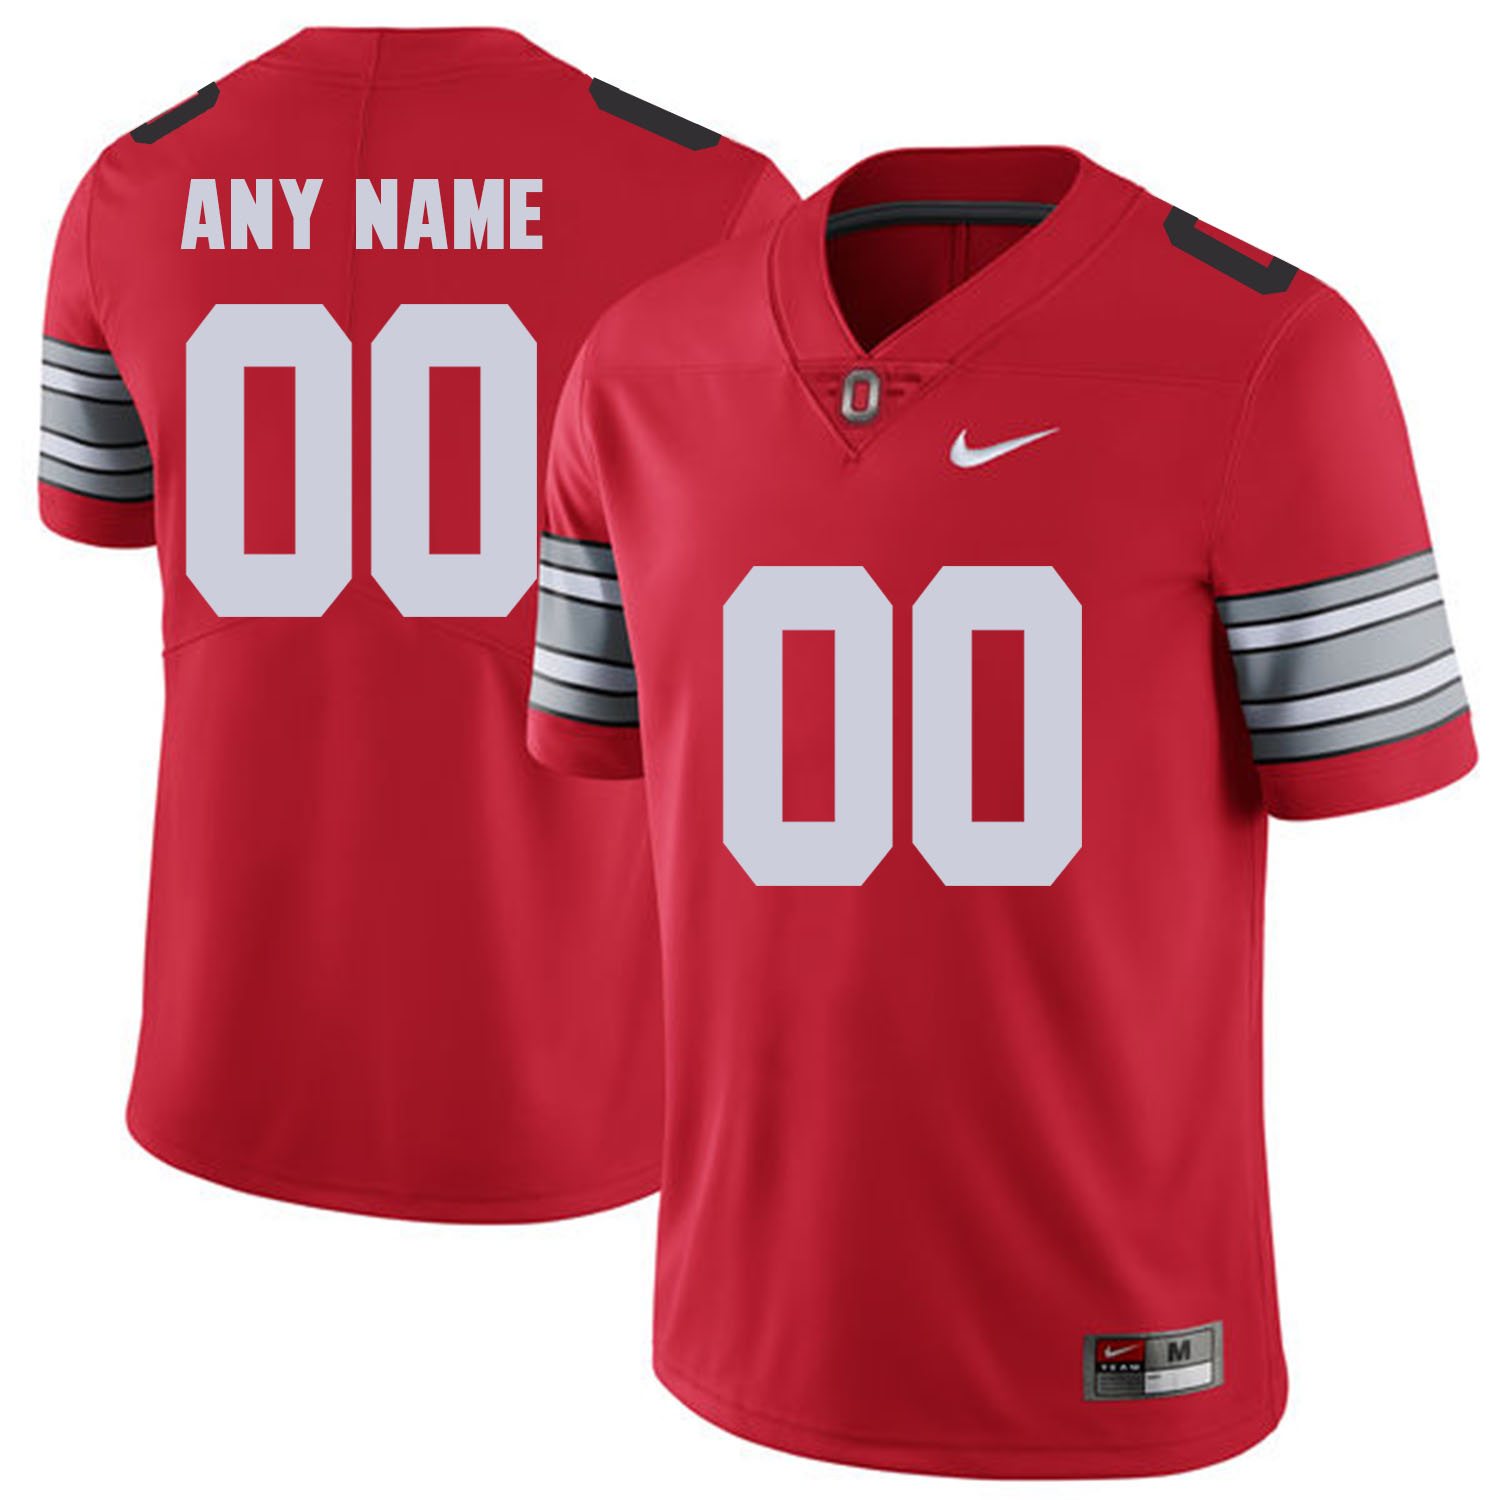 Men Ohio State 00 Any name Red Customized NCAA Jerseys